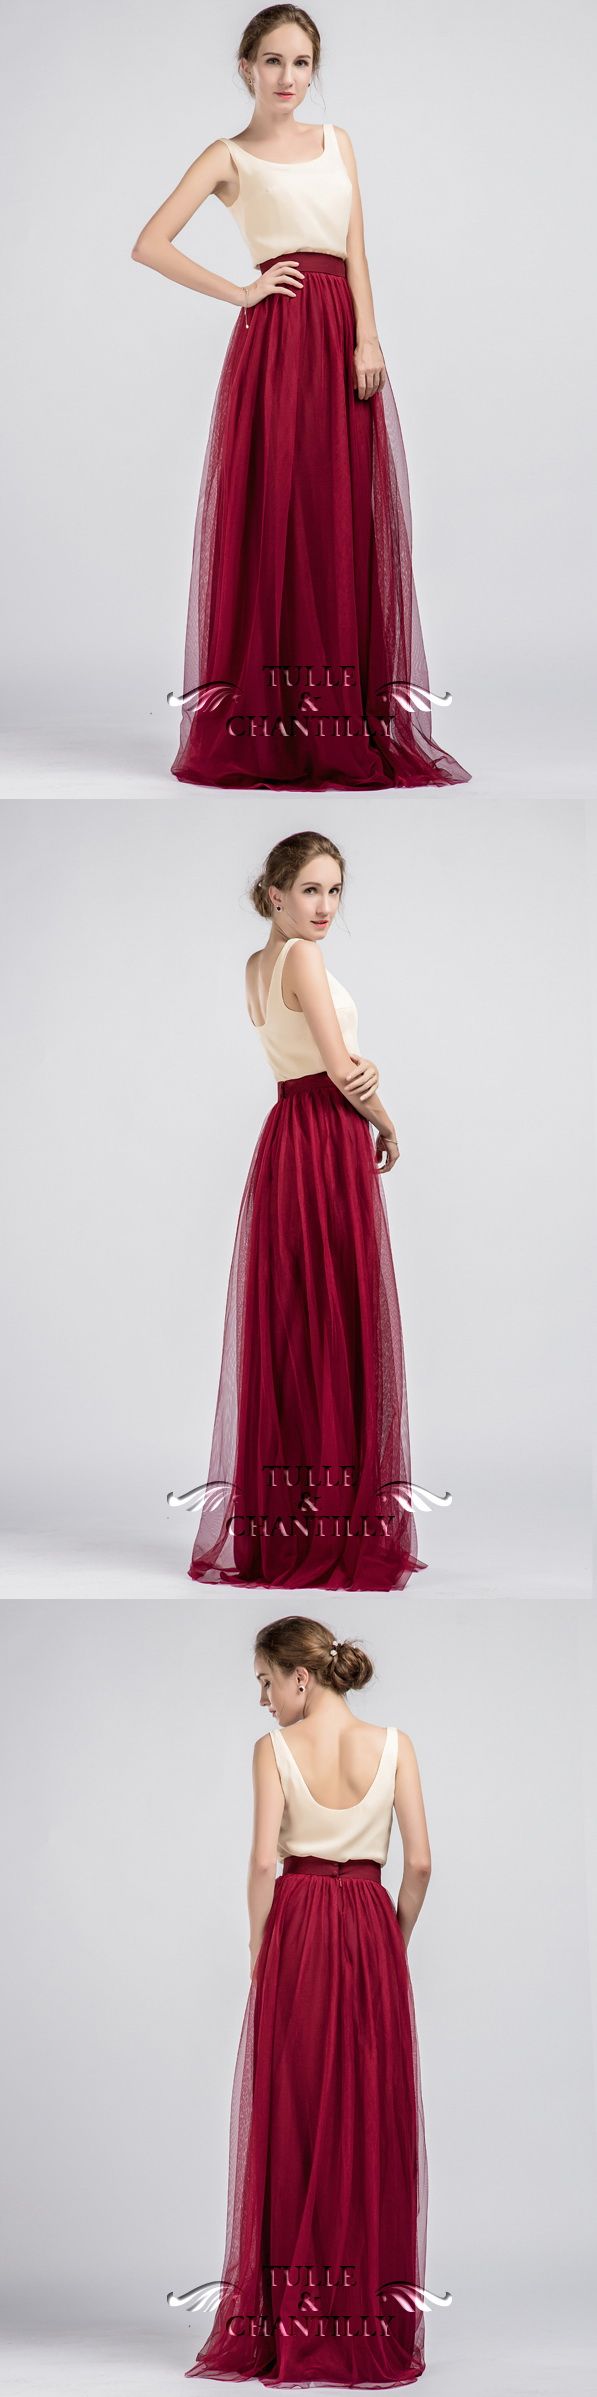 Mariage - Long Two Piece Bridesmaid Dresses With Marsala Tulle Skirt [TBQP335] - $169.00 : Custom Made Wedding, Prom, Evening Dresses Online